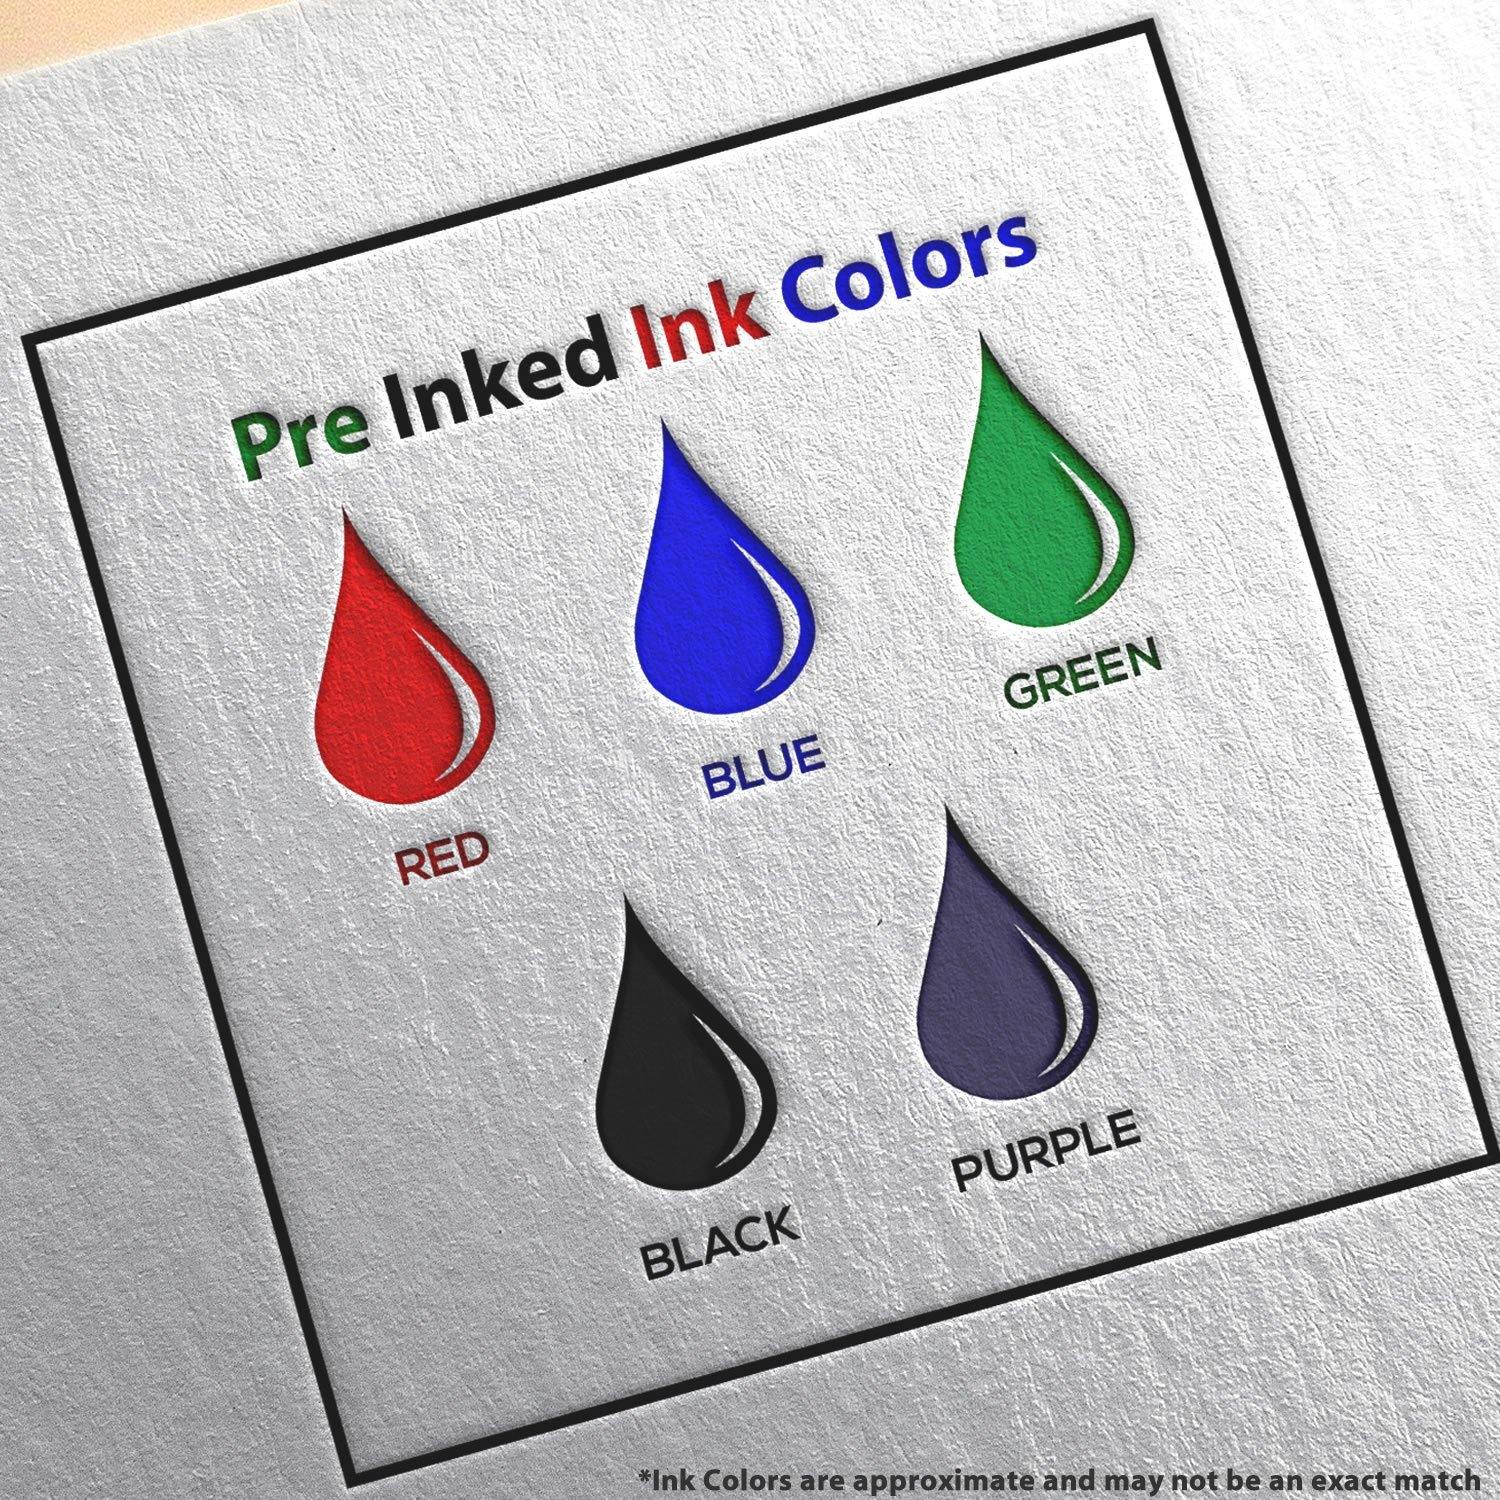 Slim Pre-Inked Paid with Date Line Stamp Ink Color Options